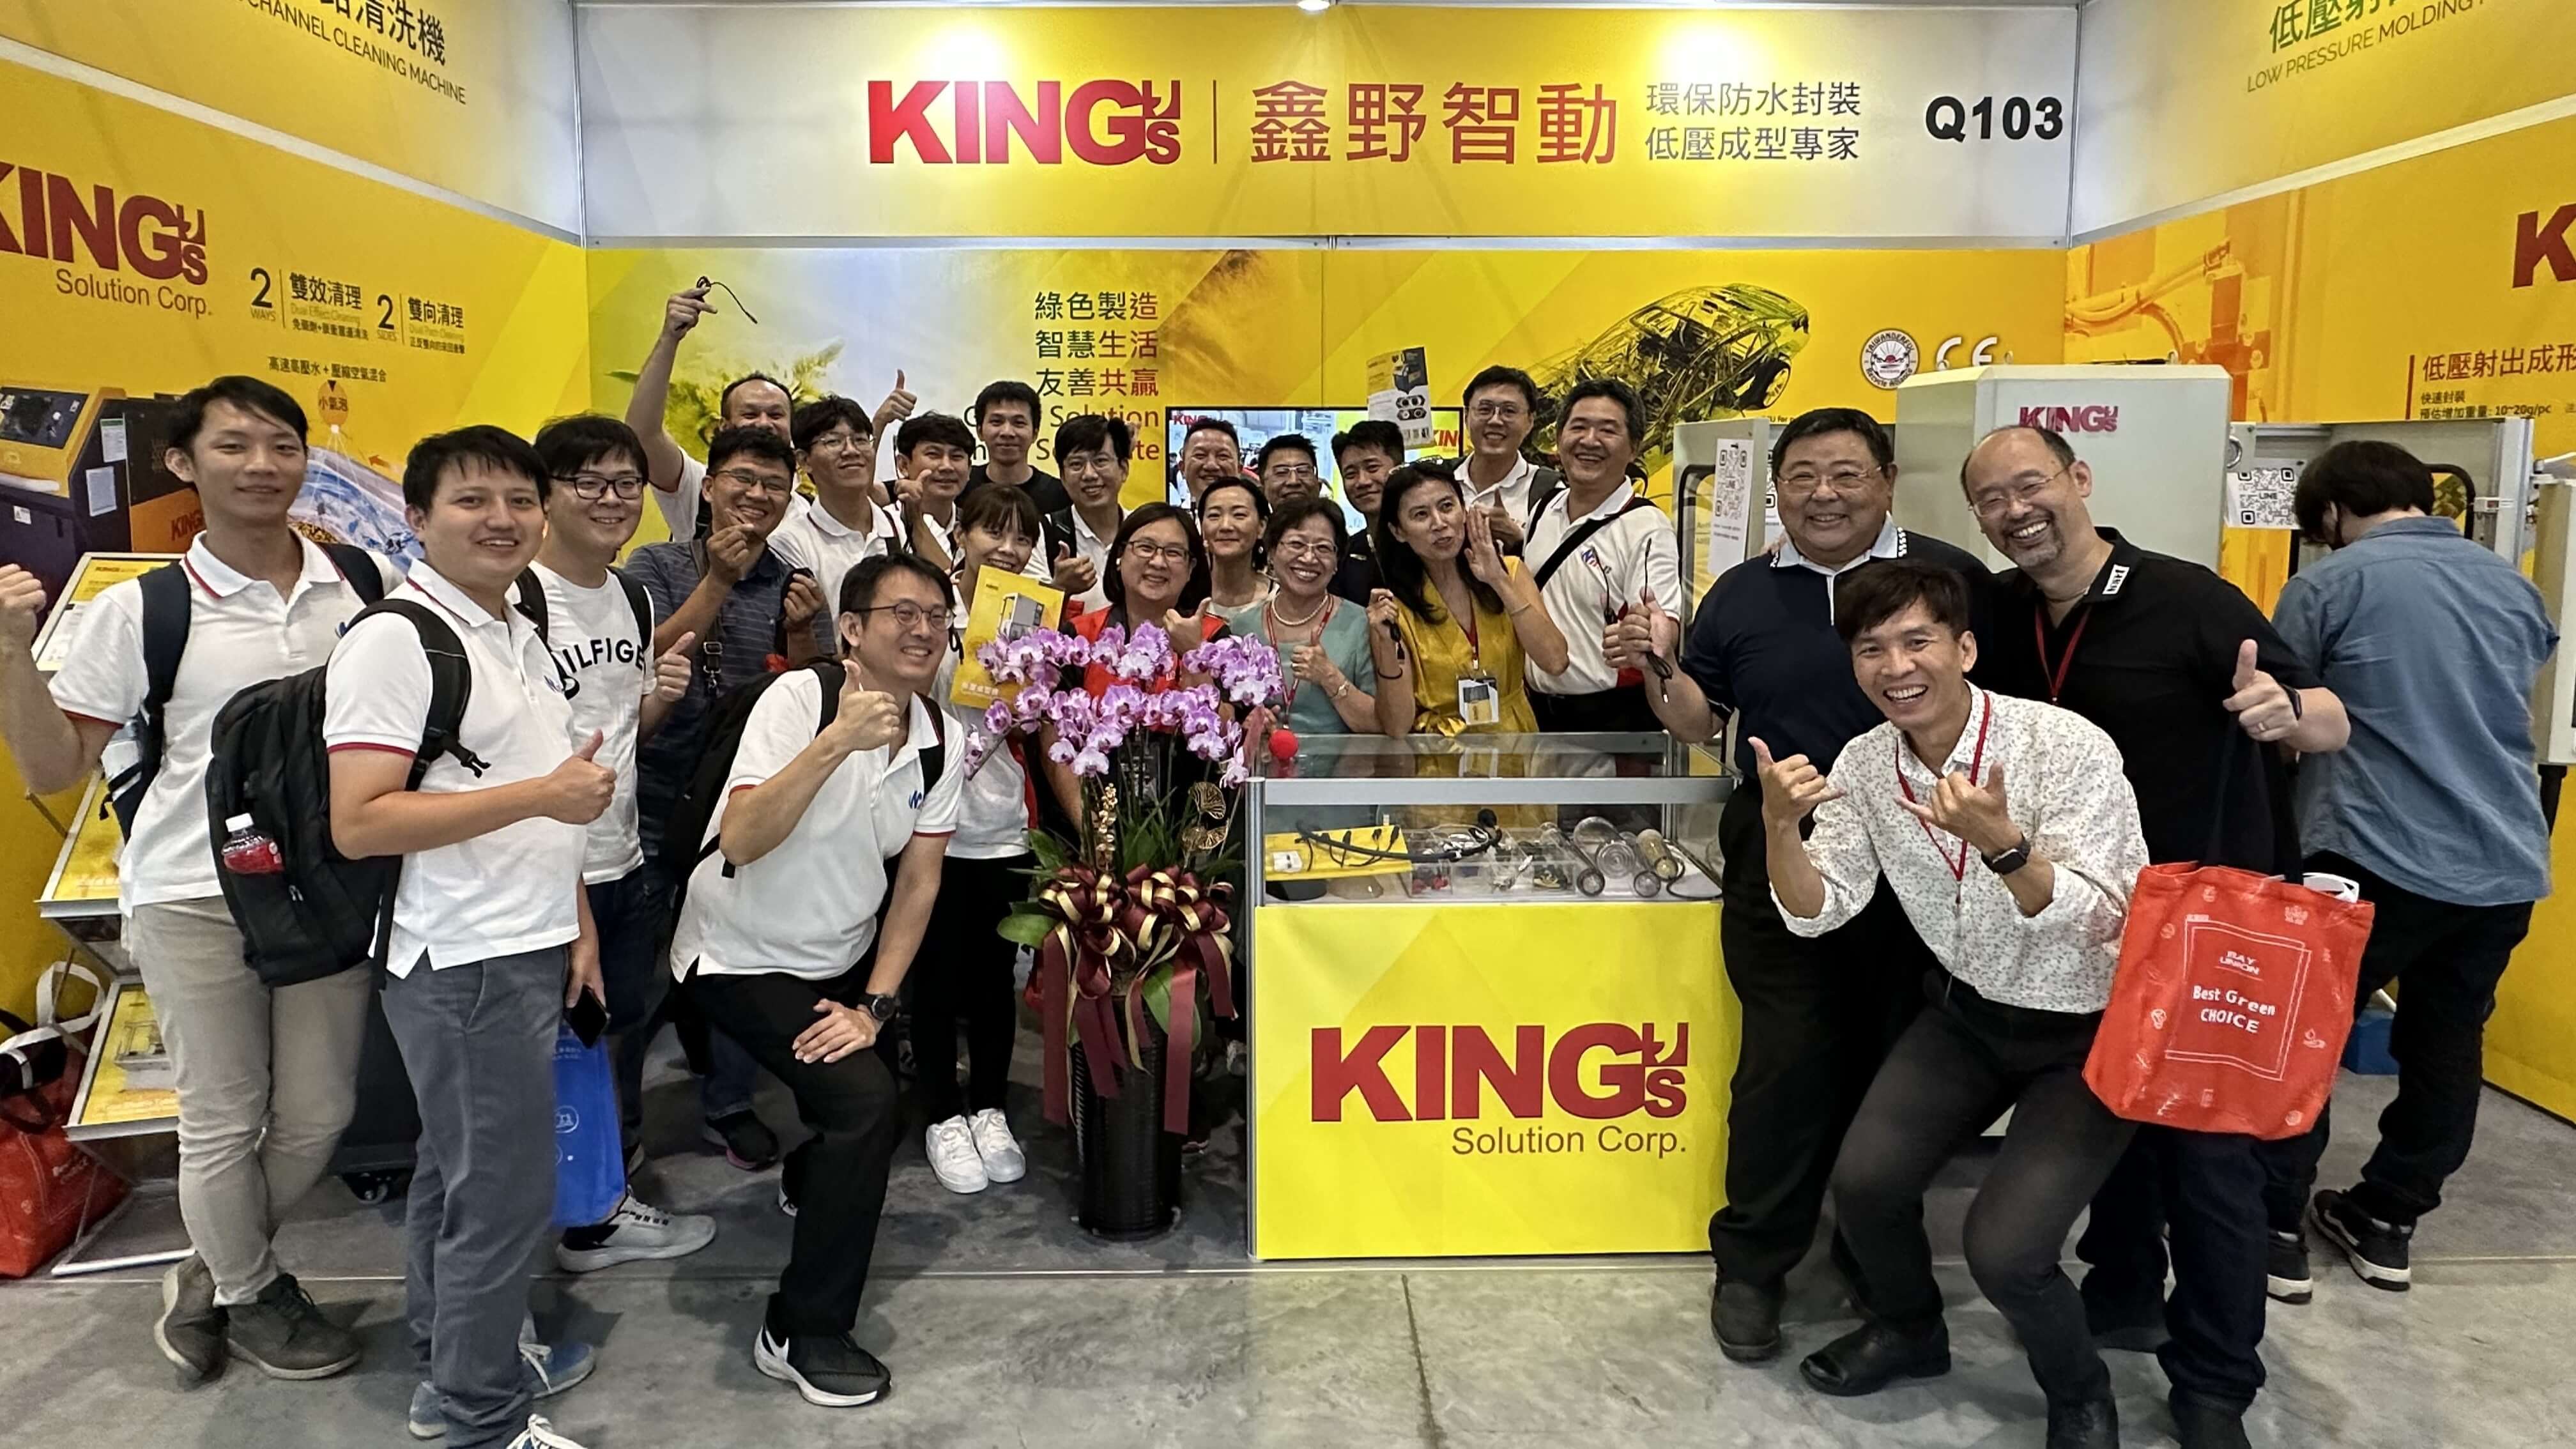 KING's Solution - Low Pressure Injection Machine Brand: New General Manager Charles Sheu Leads the Green and Sustainable New Era.